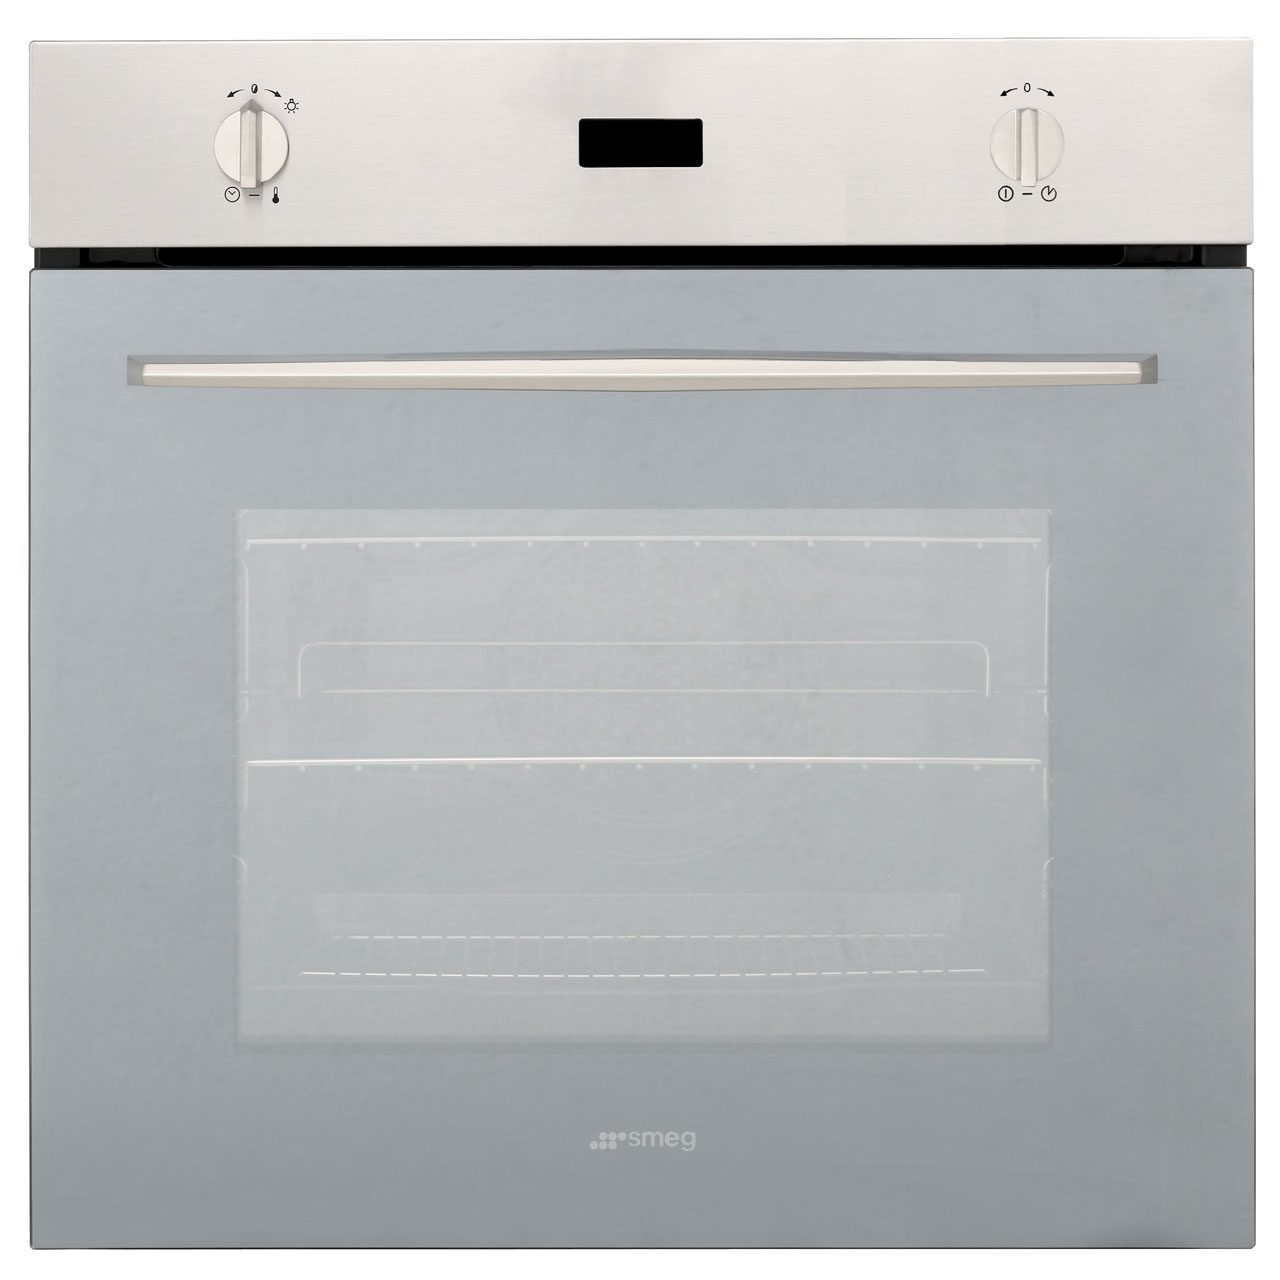 Smeg SF585XLS Integrated Single Oven in Stainless Steel